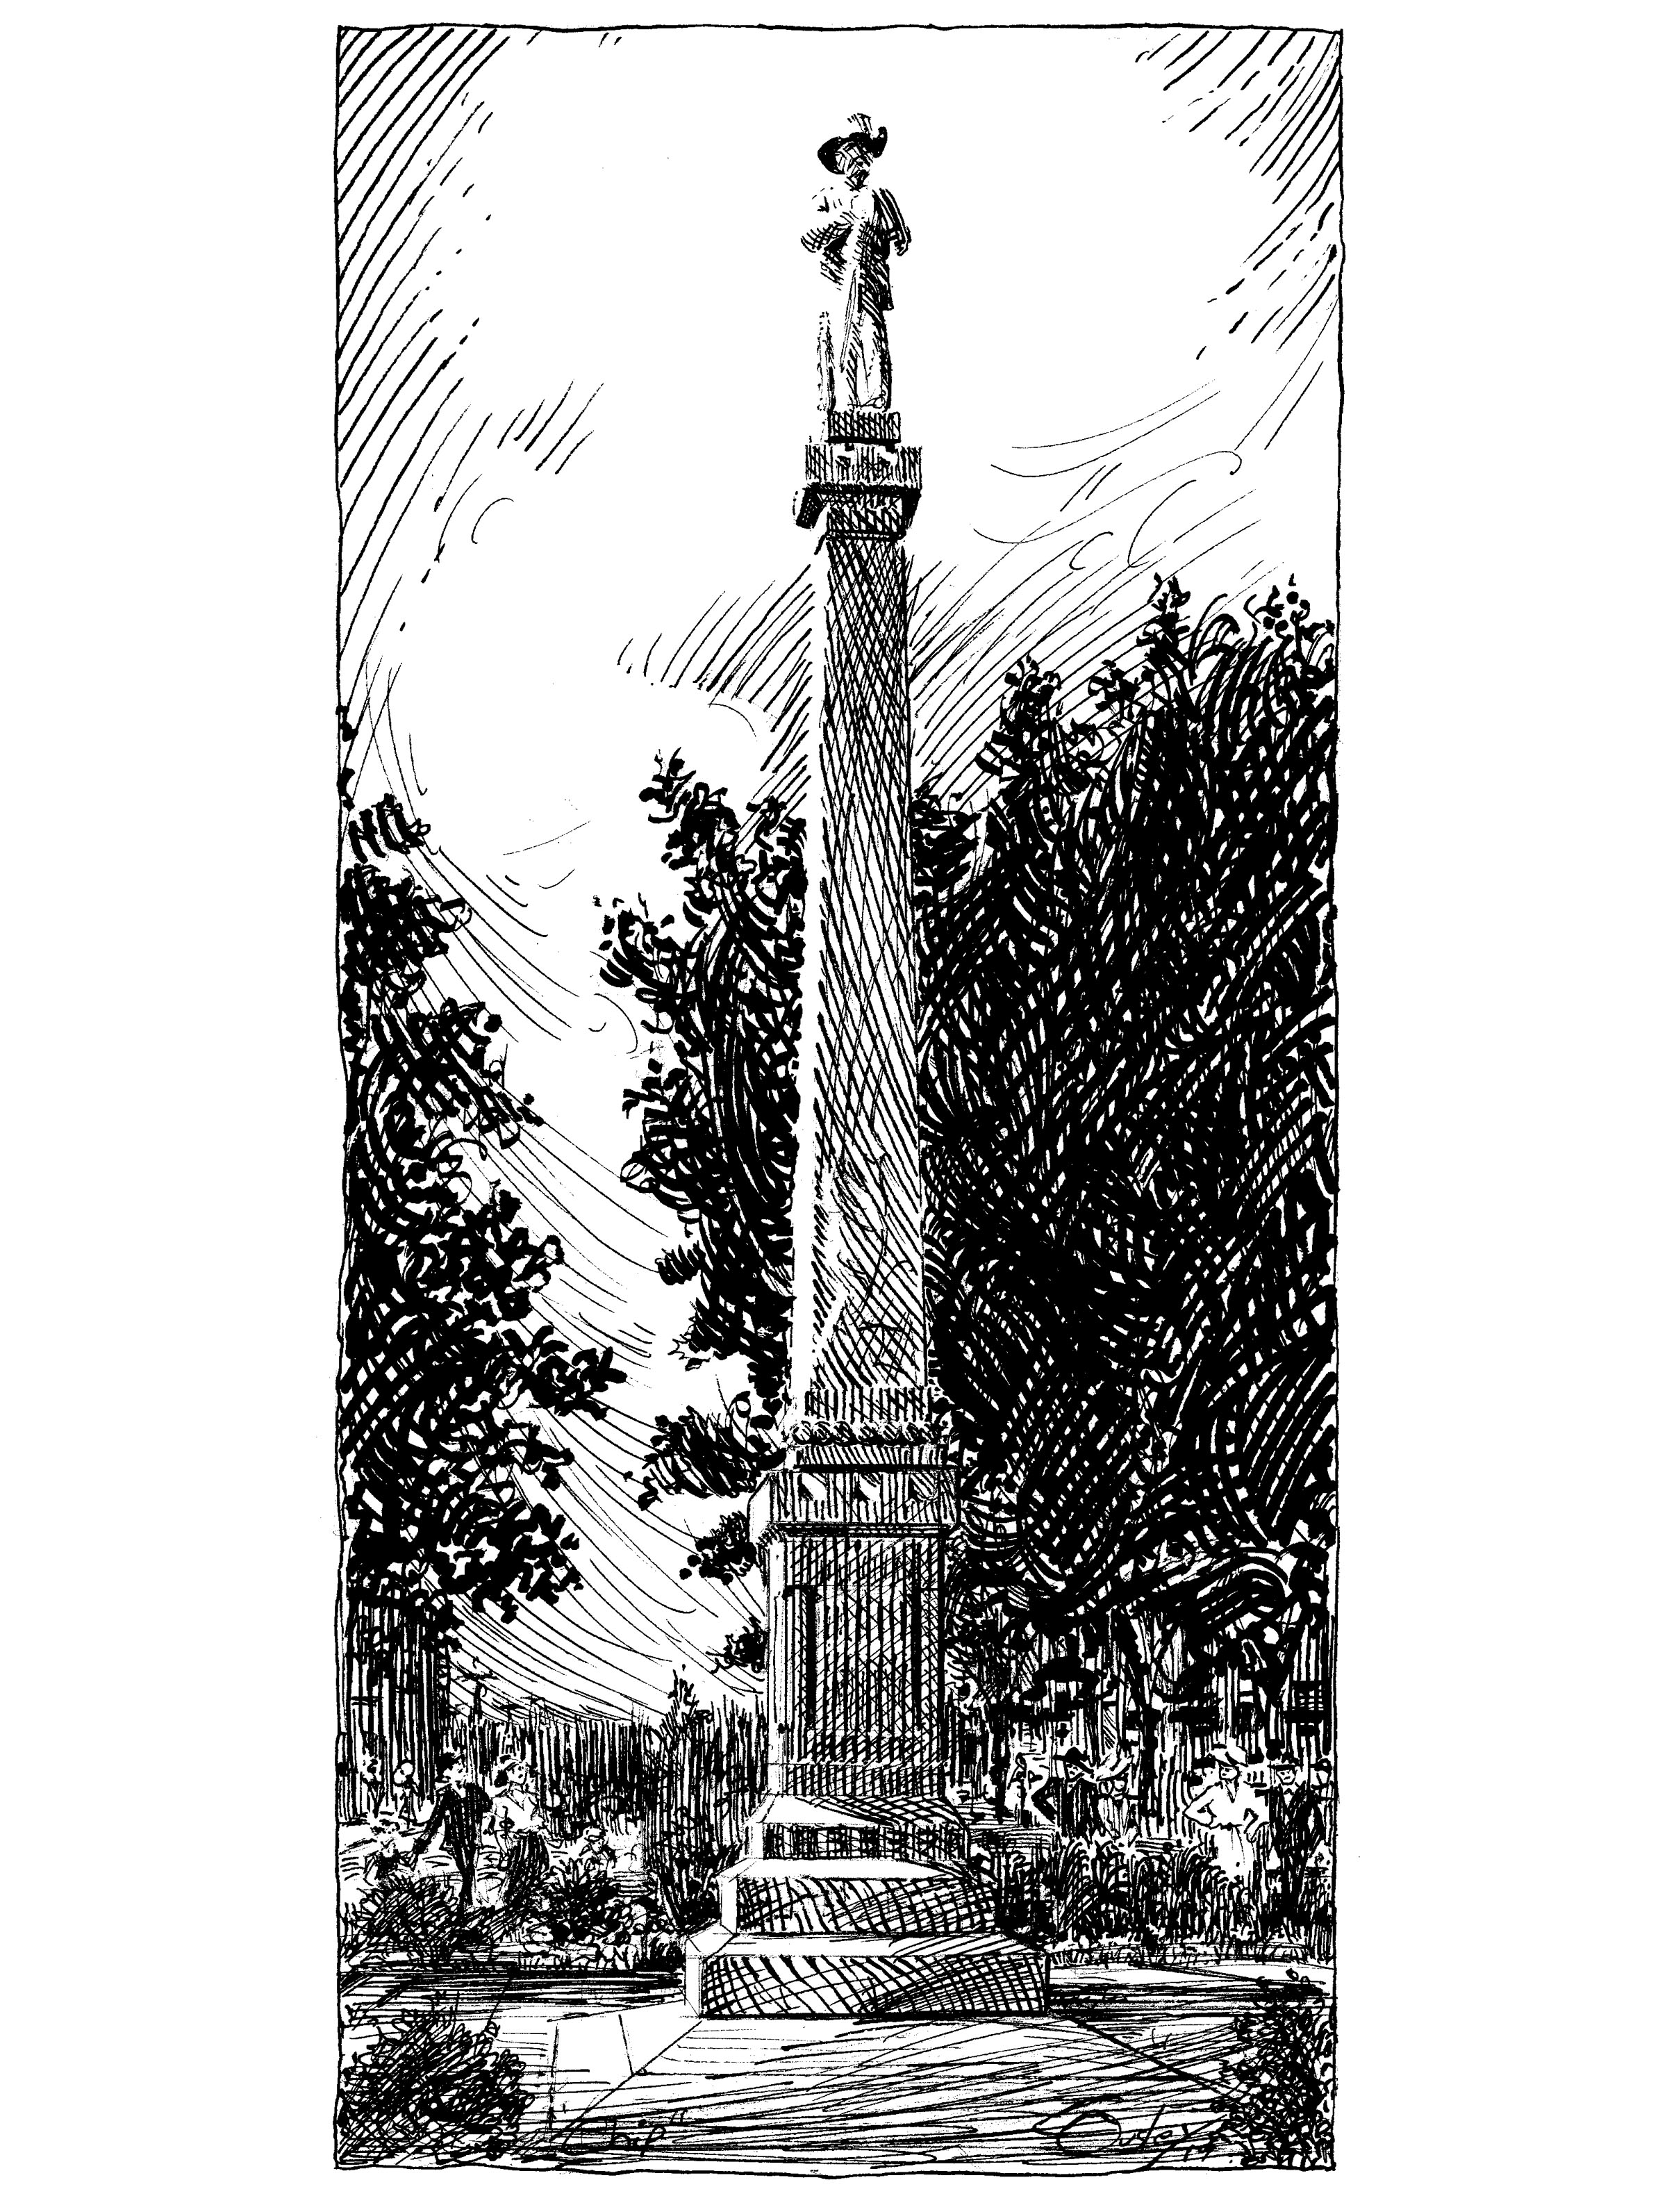 The Confederate Monument at the Franklin Public Square (aka Chip)